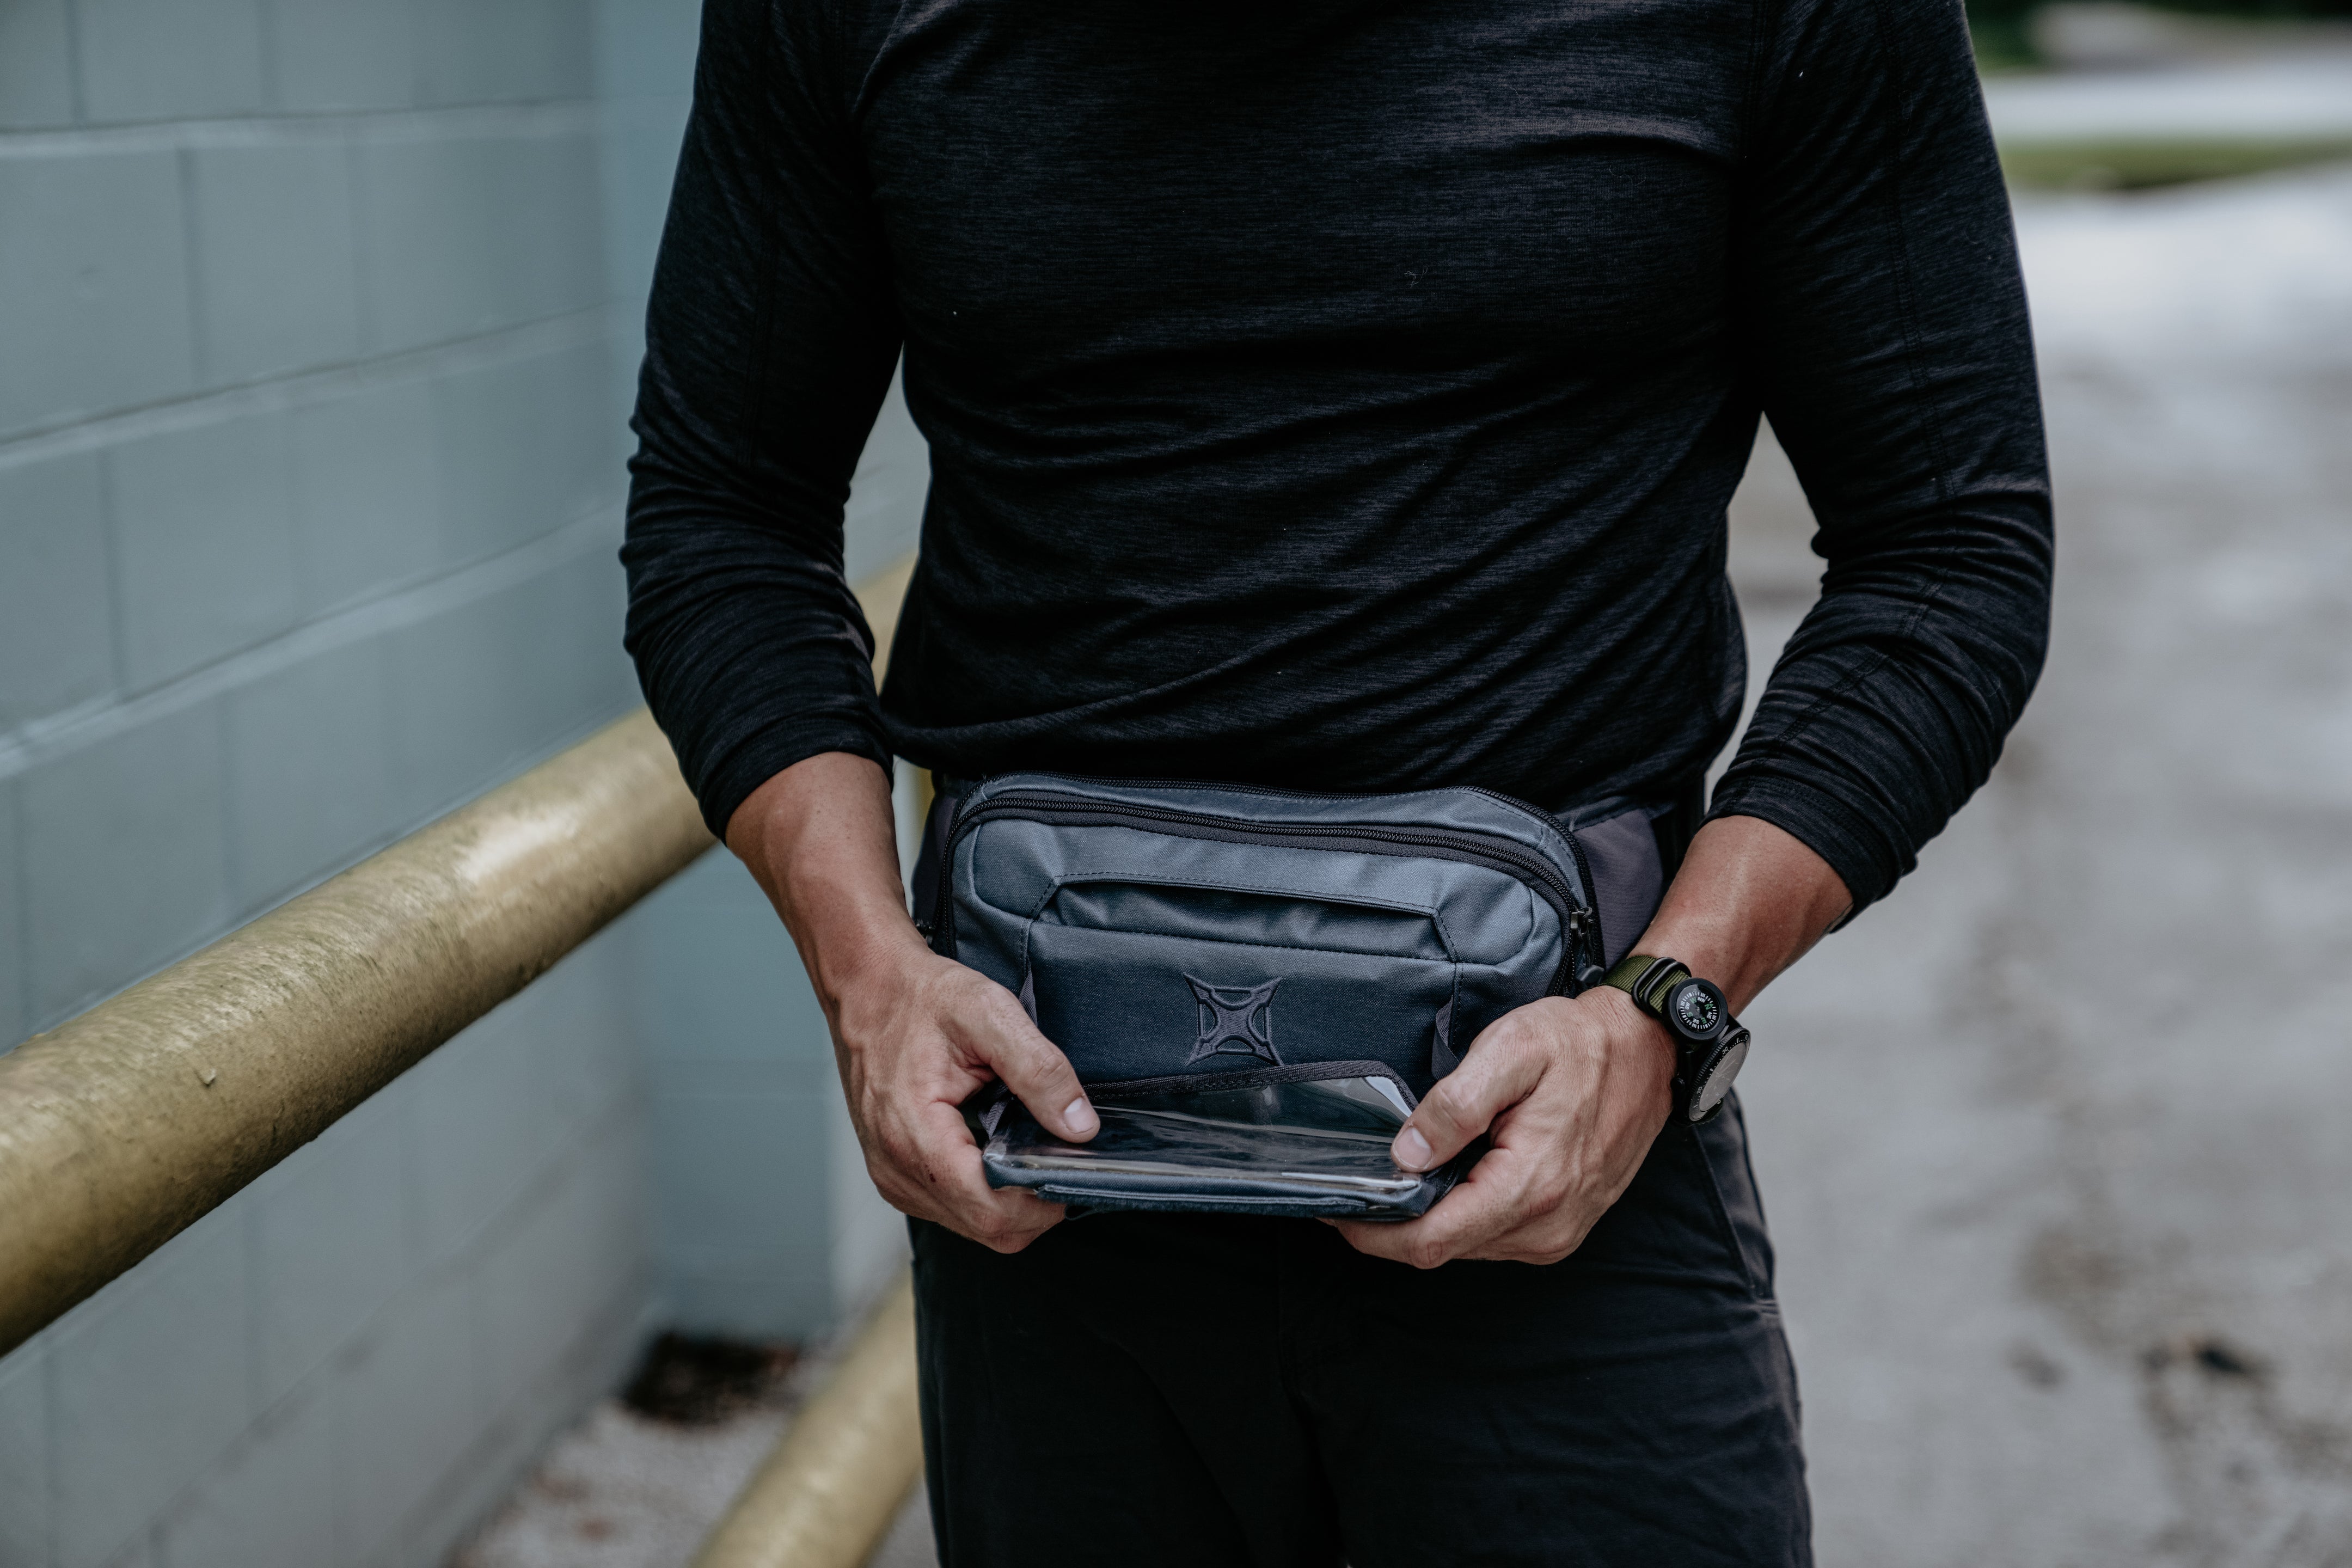  Vertx SOCP Tactical Fanny Pack for Concealed Carry